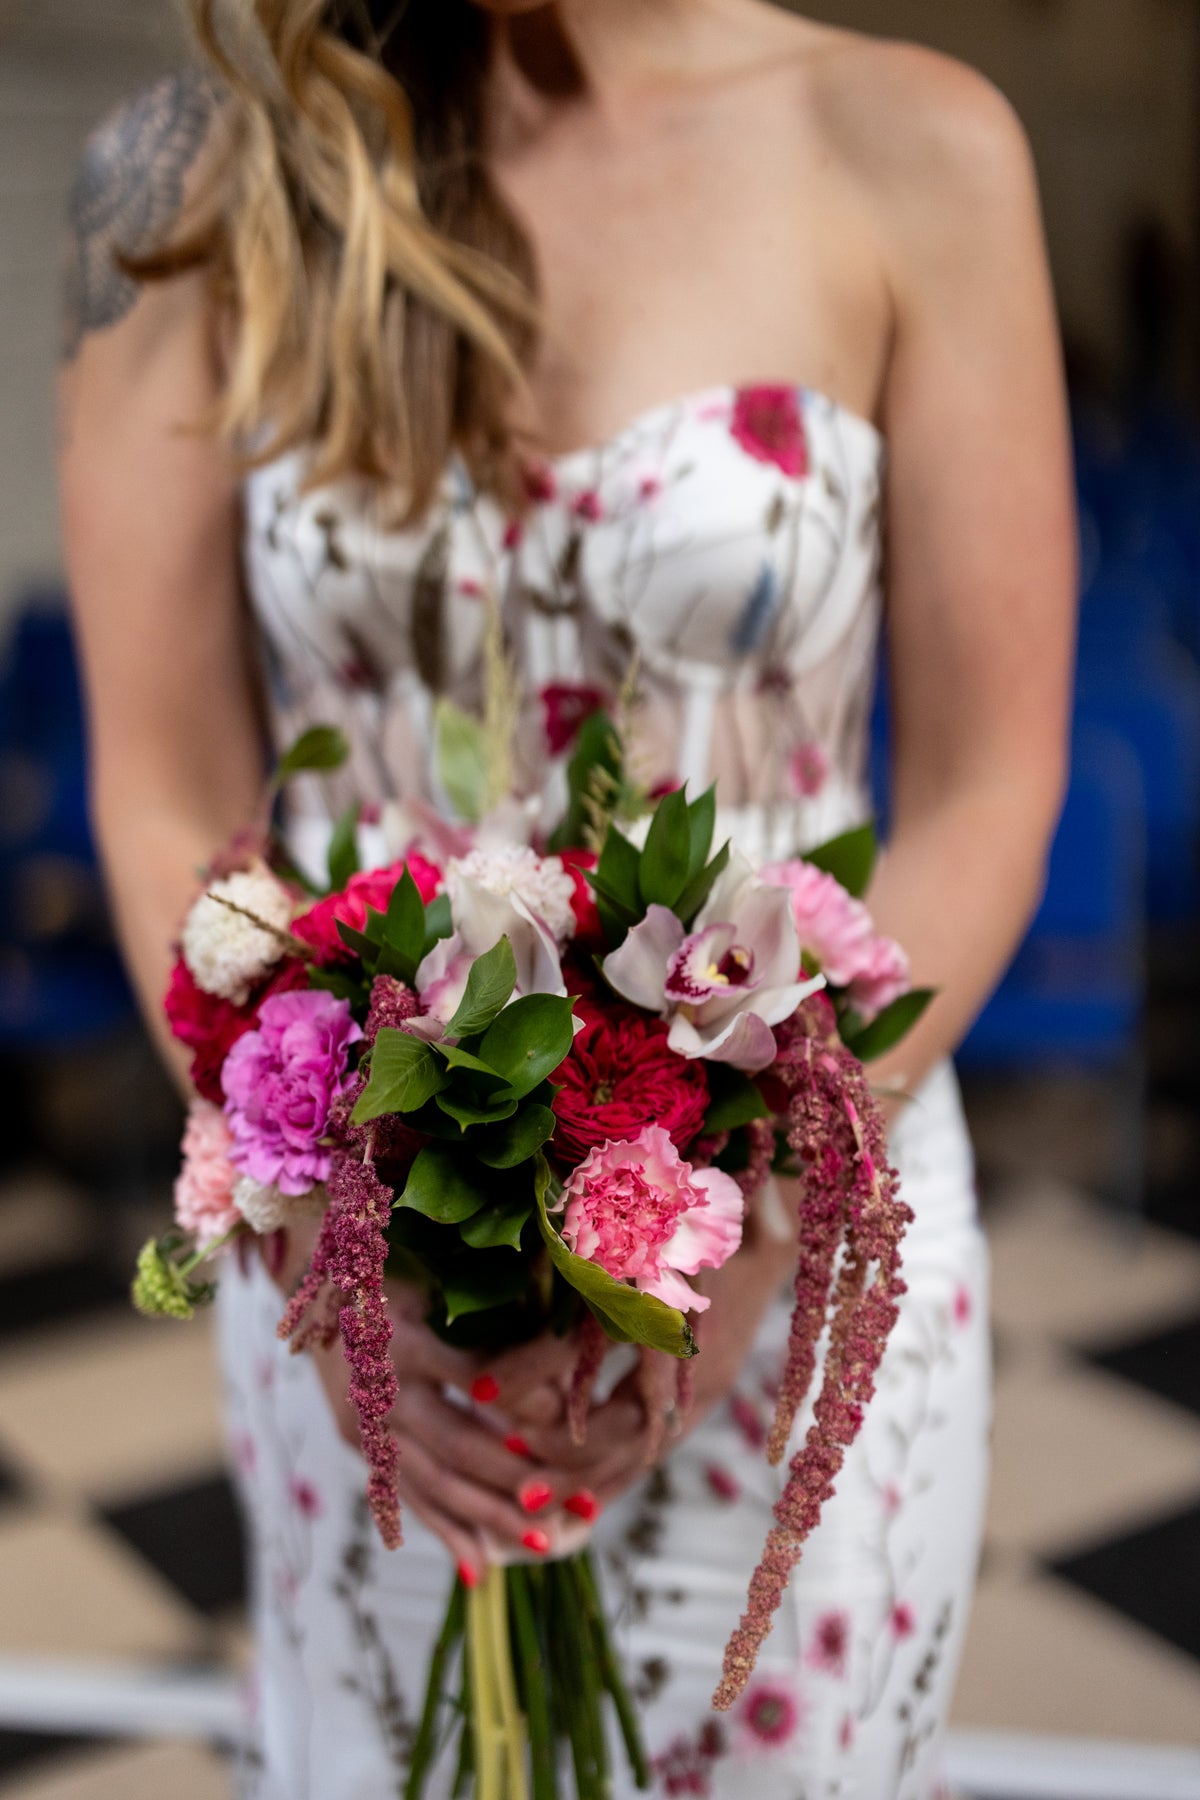 Irish bride wearing a floral wedding dress with pink and blue flowers in Ireland.